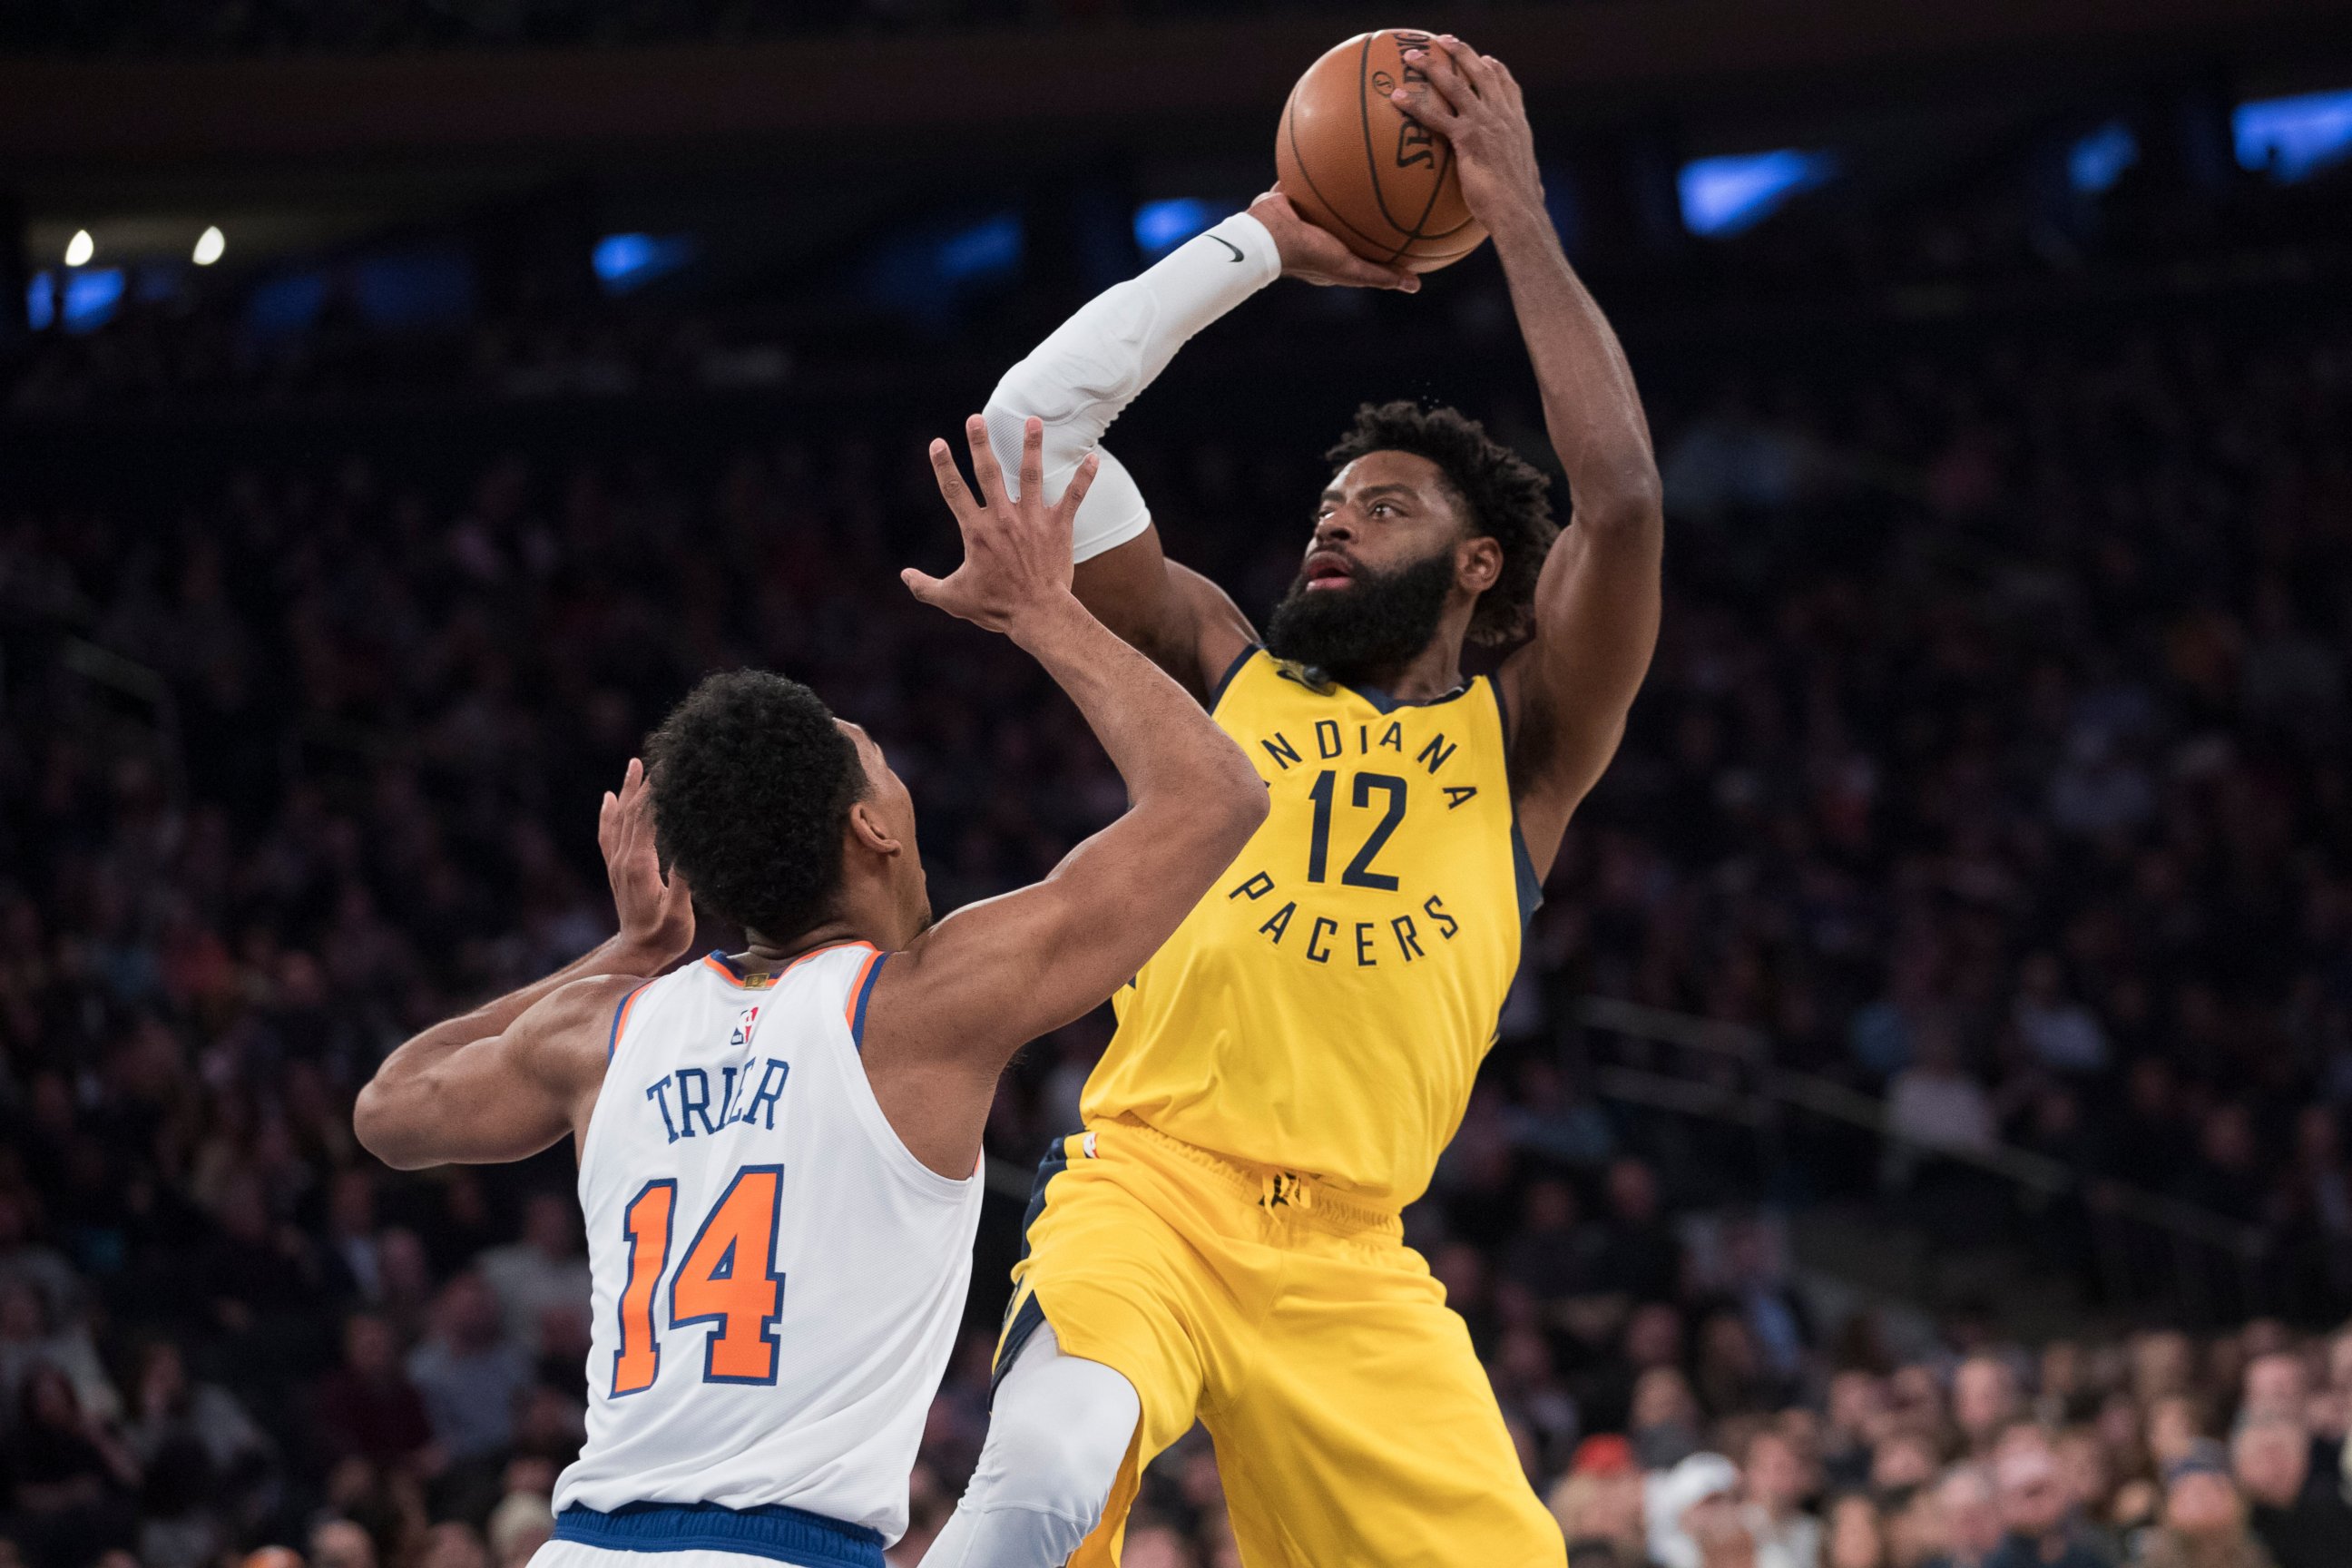 PHOTO: Indiana Pacers guard Tyreke Evans (12) shoots over New York Knicks guard Allonzo Trier (14) during the first half of an NBA basketball game Friday, Jan. 11, 2019, at Madison Square Garden in New York.